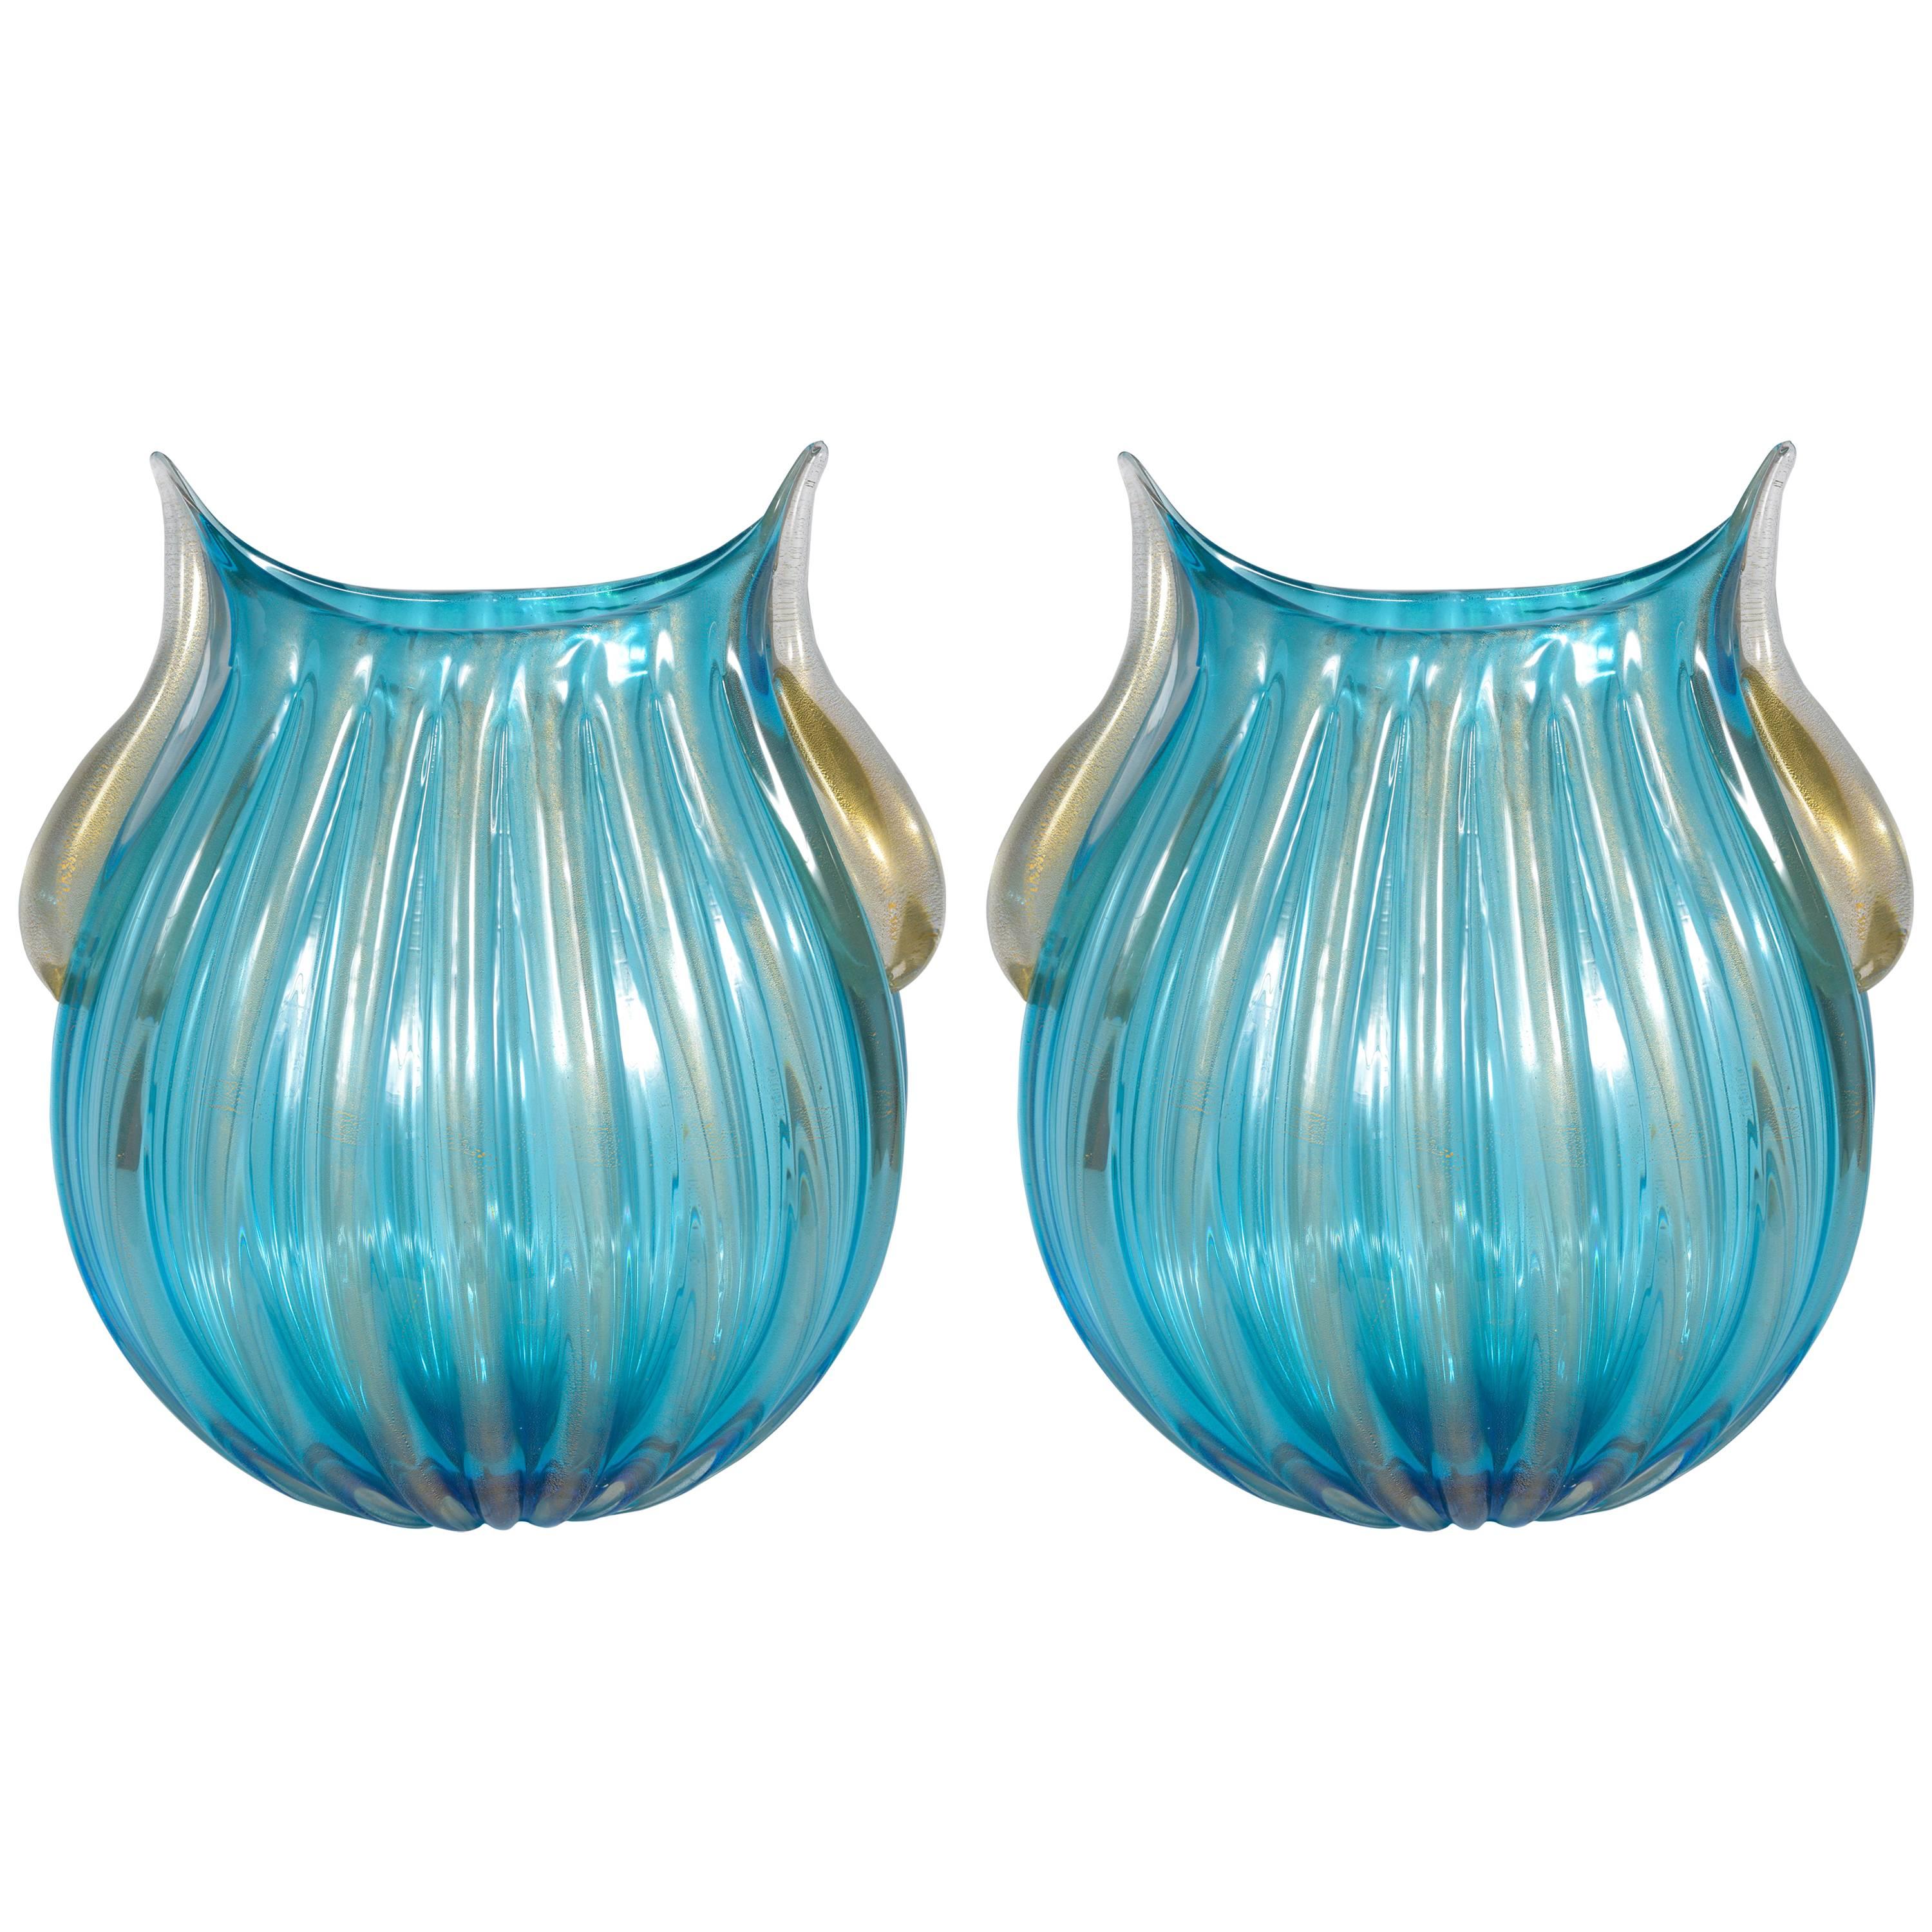 Pair of Murano Glass Vases Signed